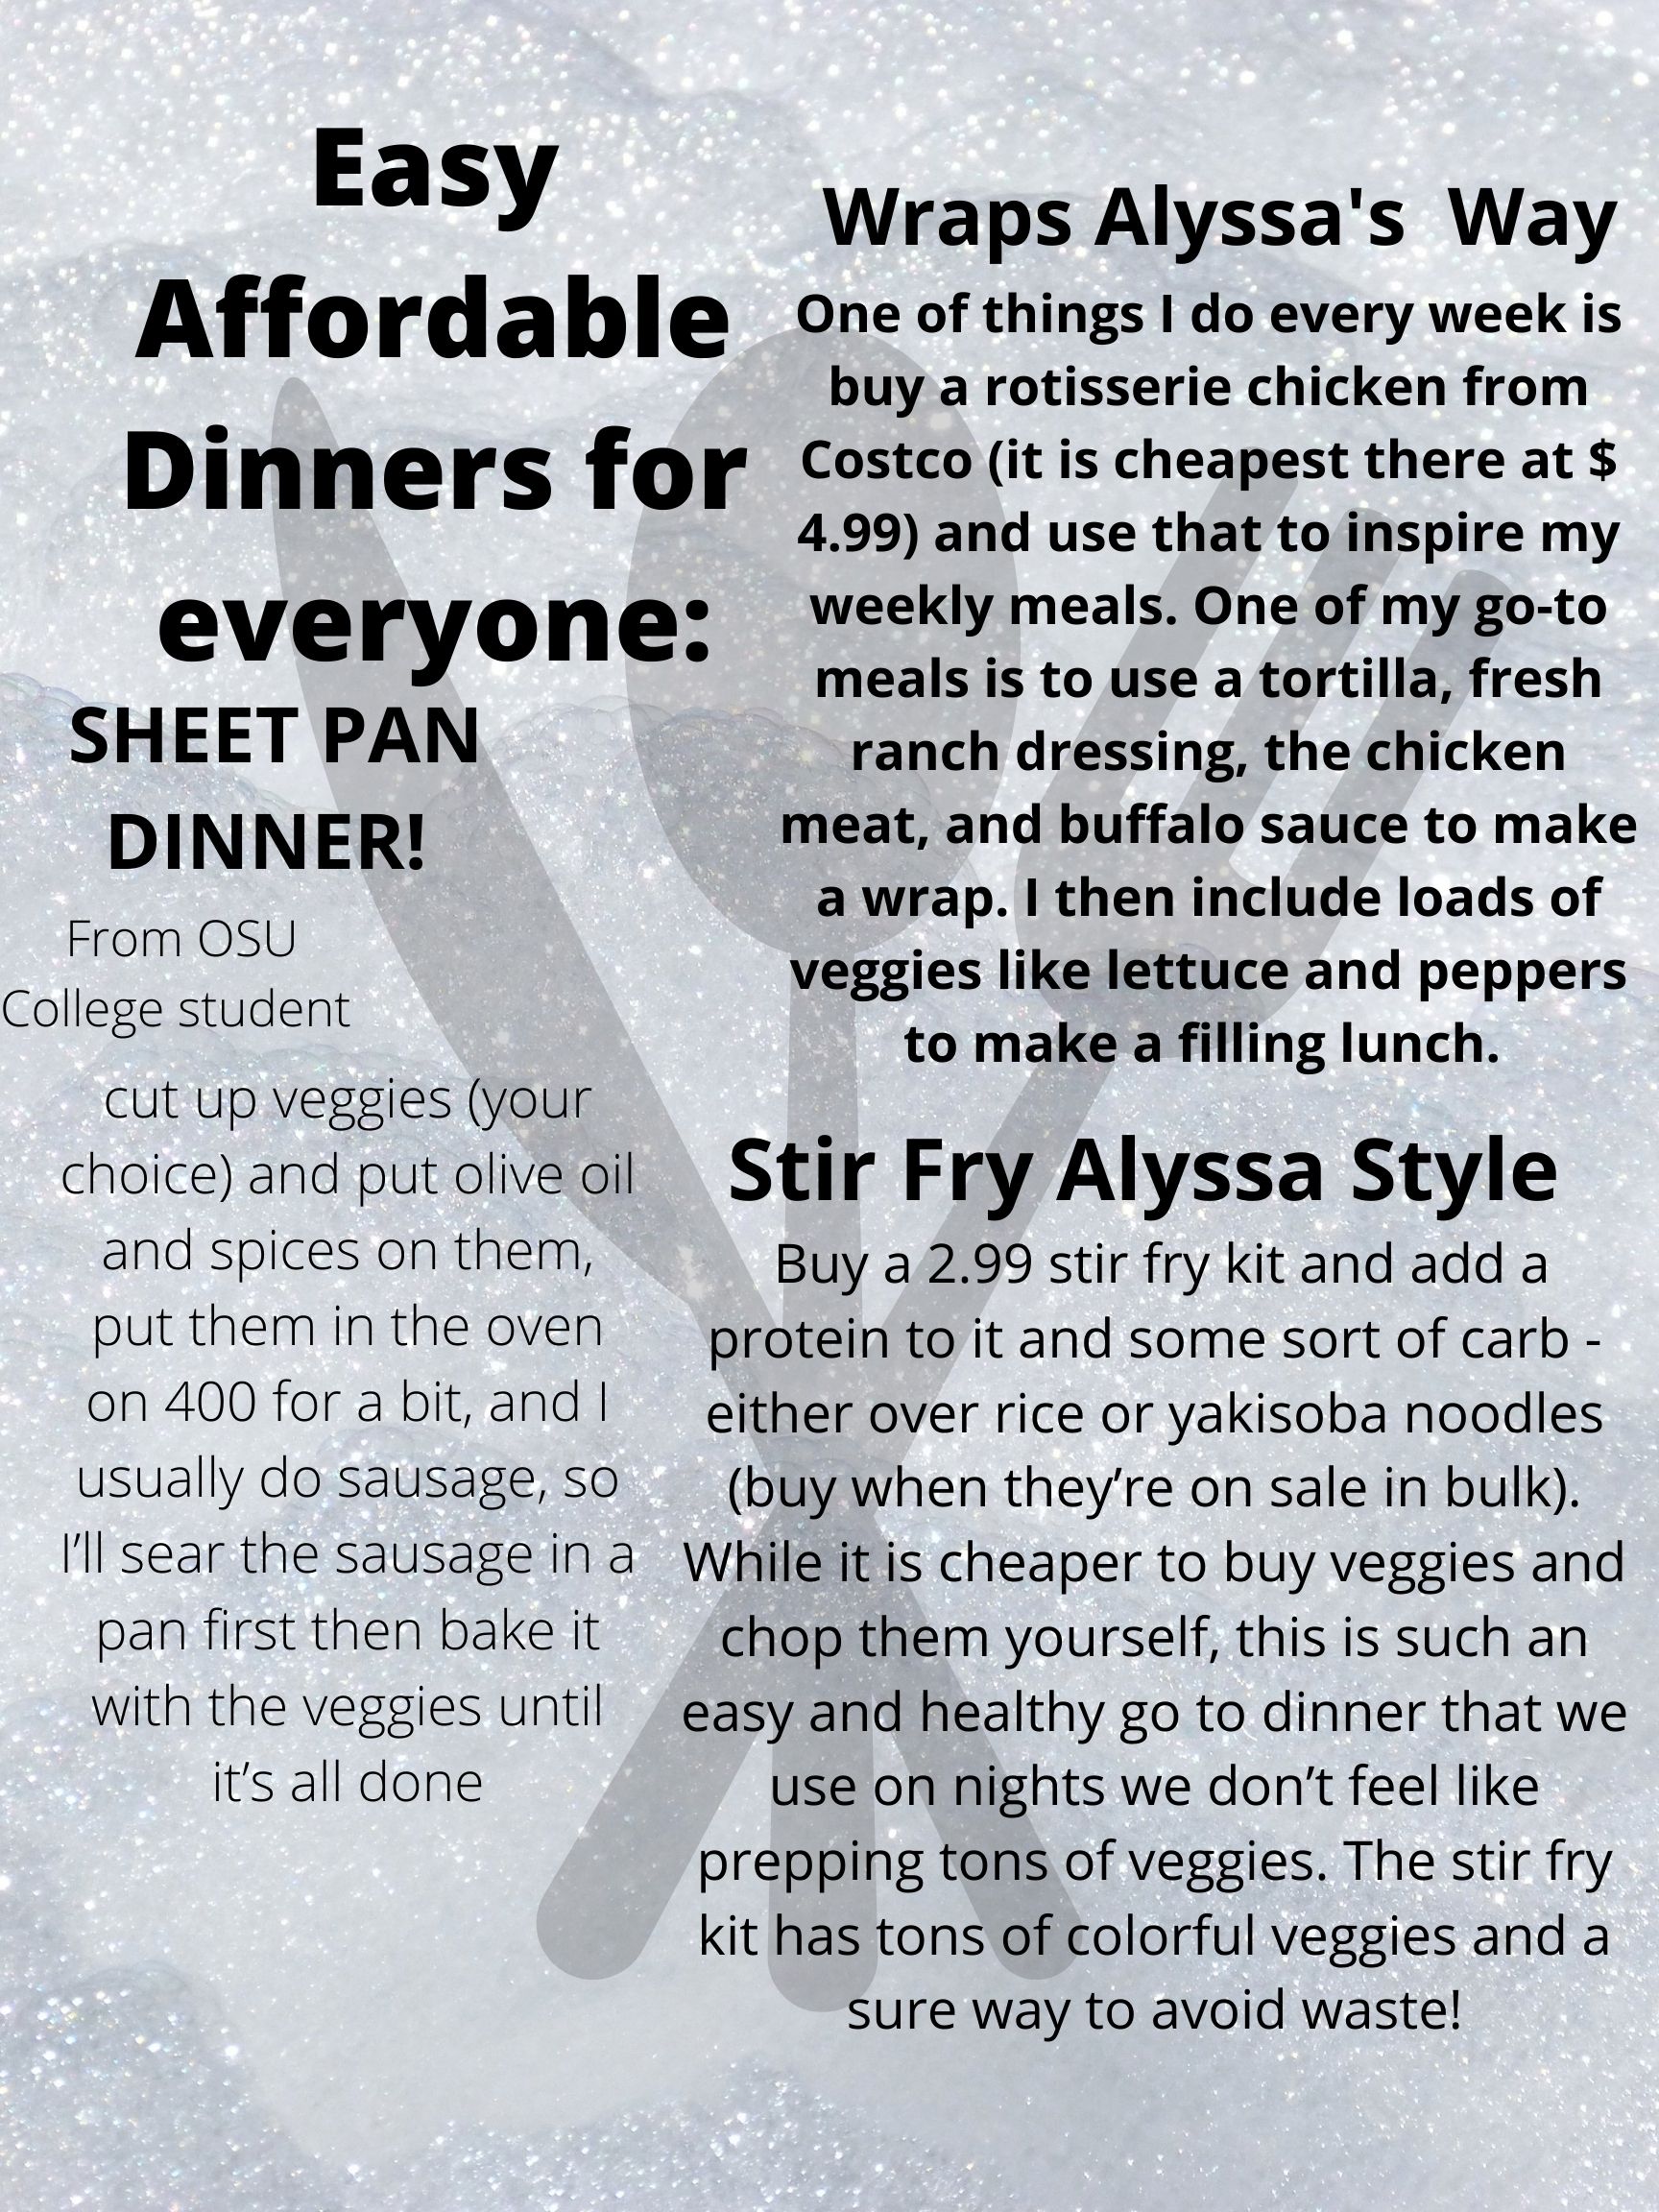 Affordable dinners for everyone, stir fry recipe